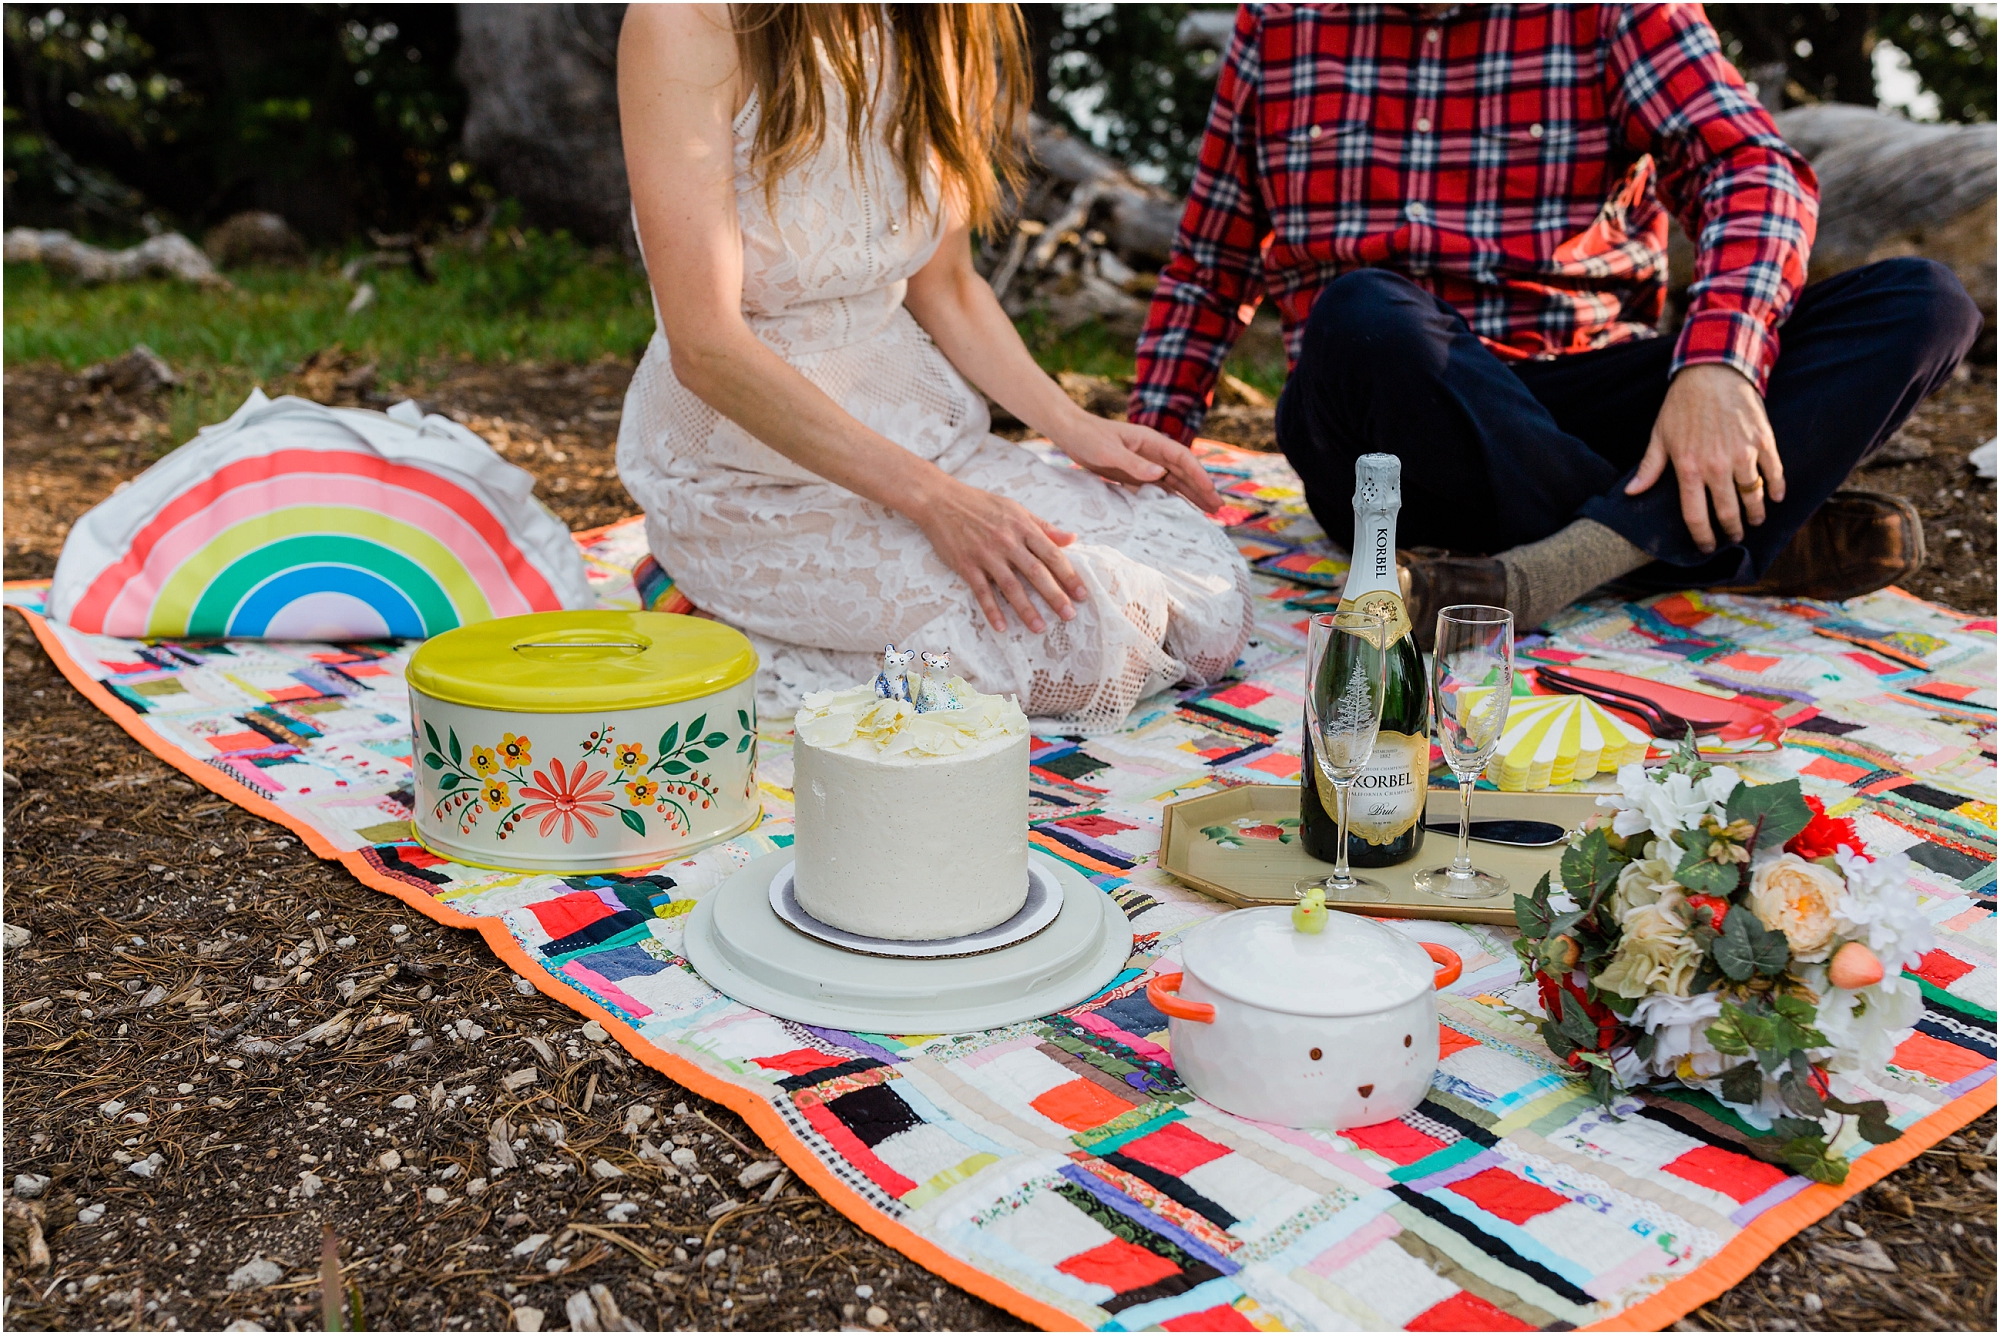 A perfect celebration of cake from Foxtail Bakery in Bend, along with strawberries and champagne, with vintage details in all colors of the rainbow, for an Oregon elopement at Crater Lake. | Erica Swantek Photography